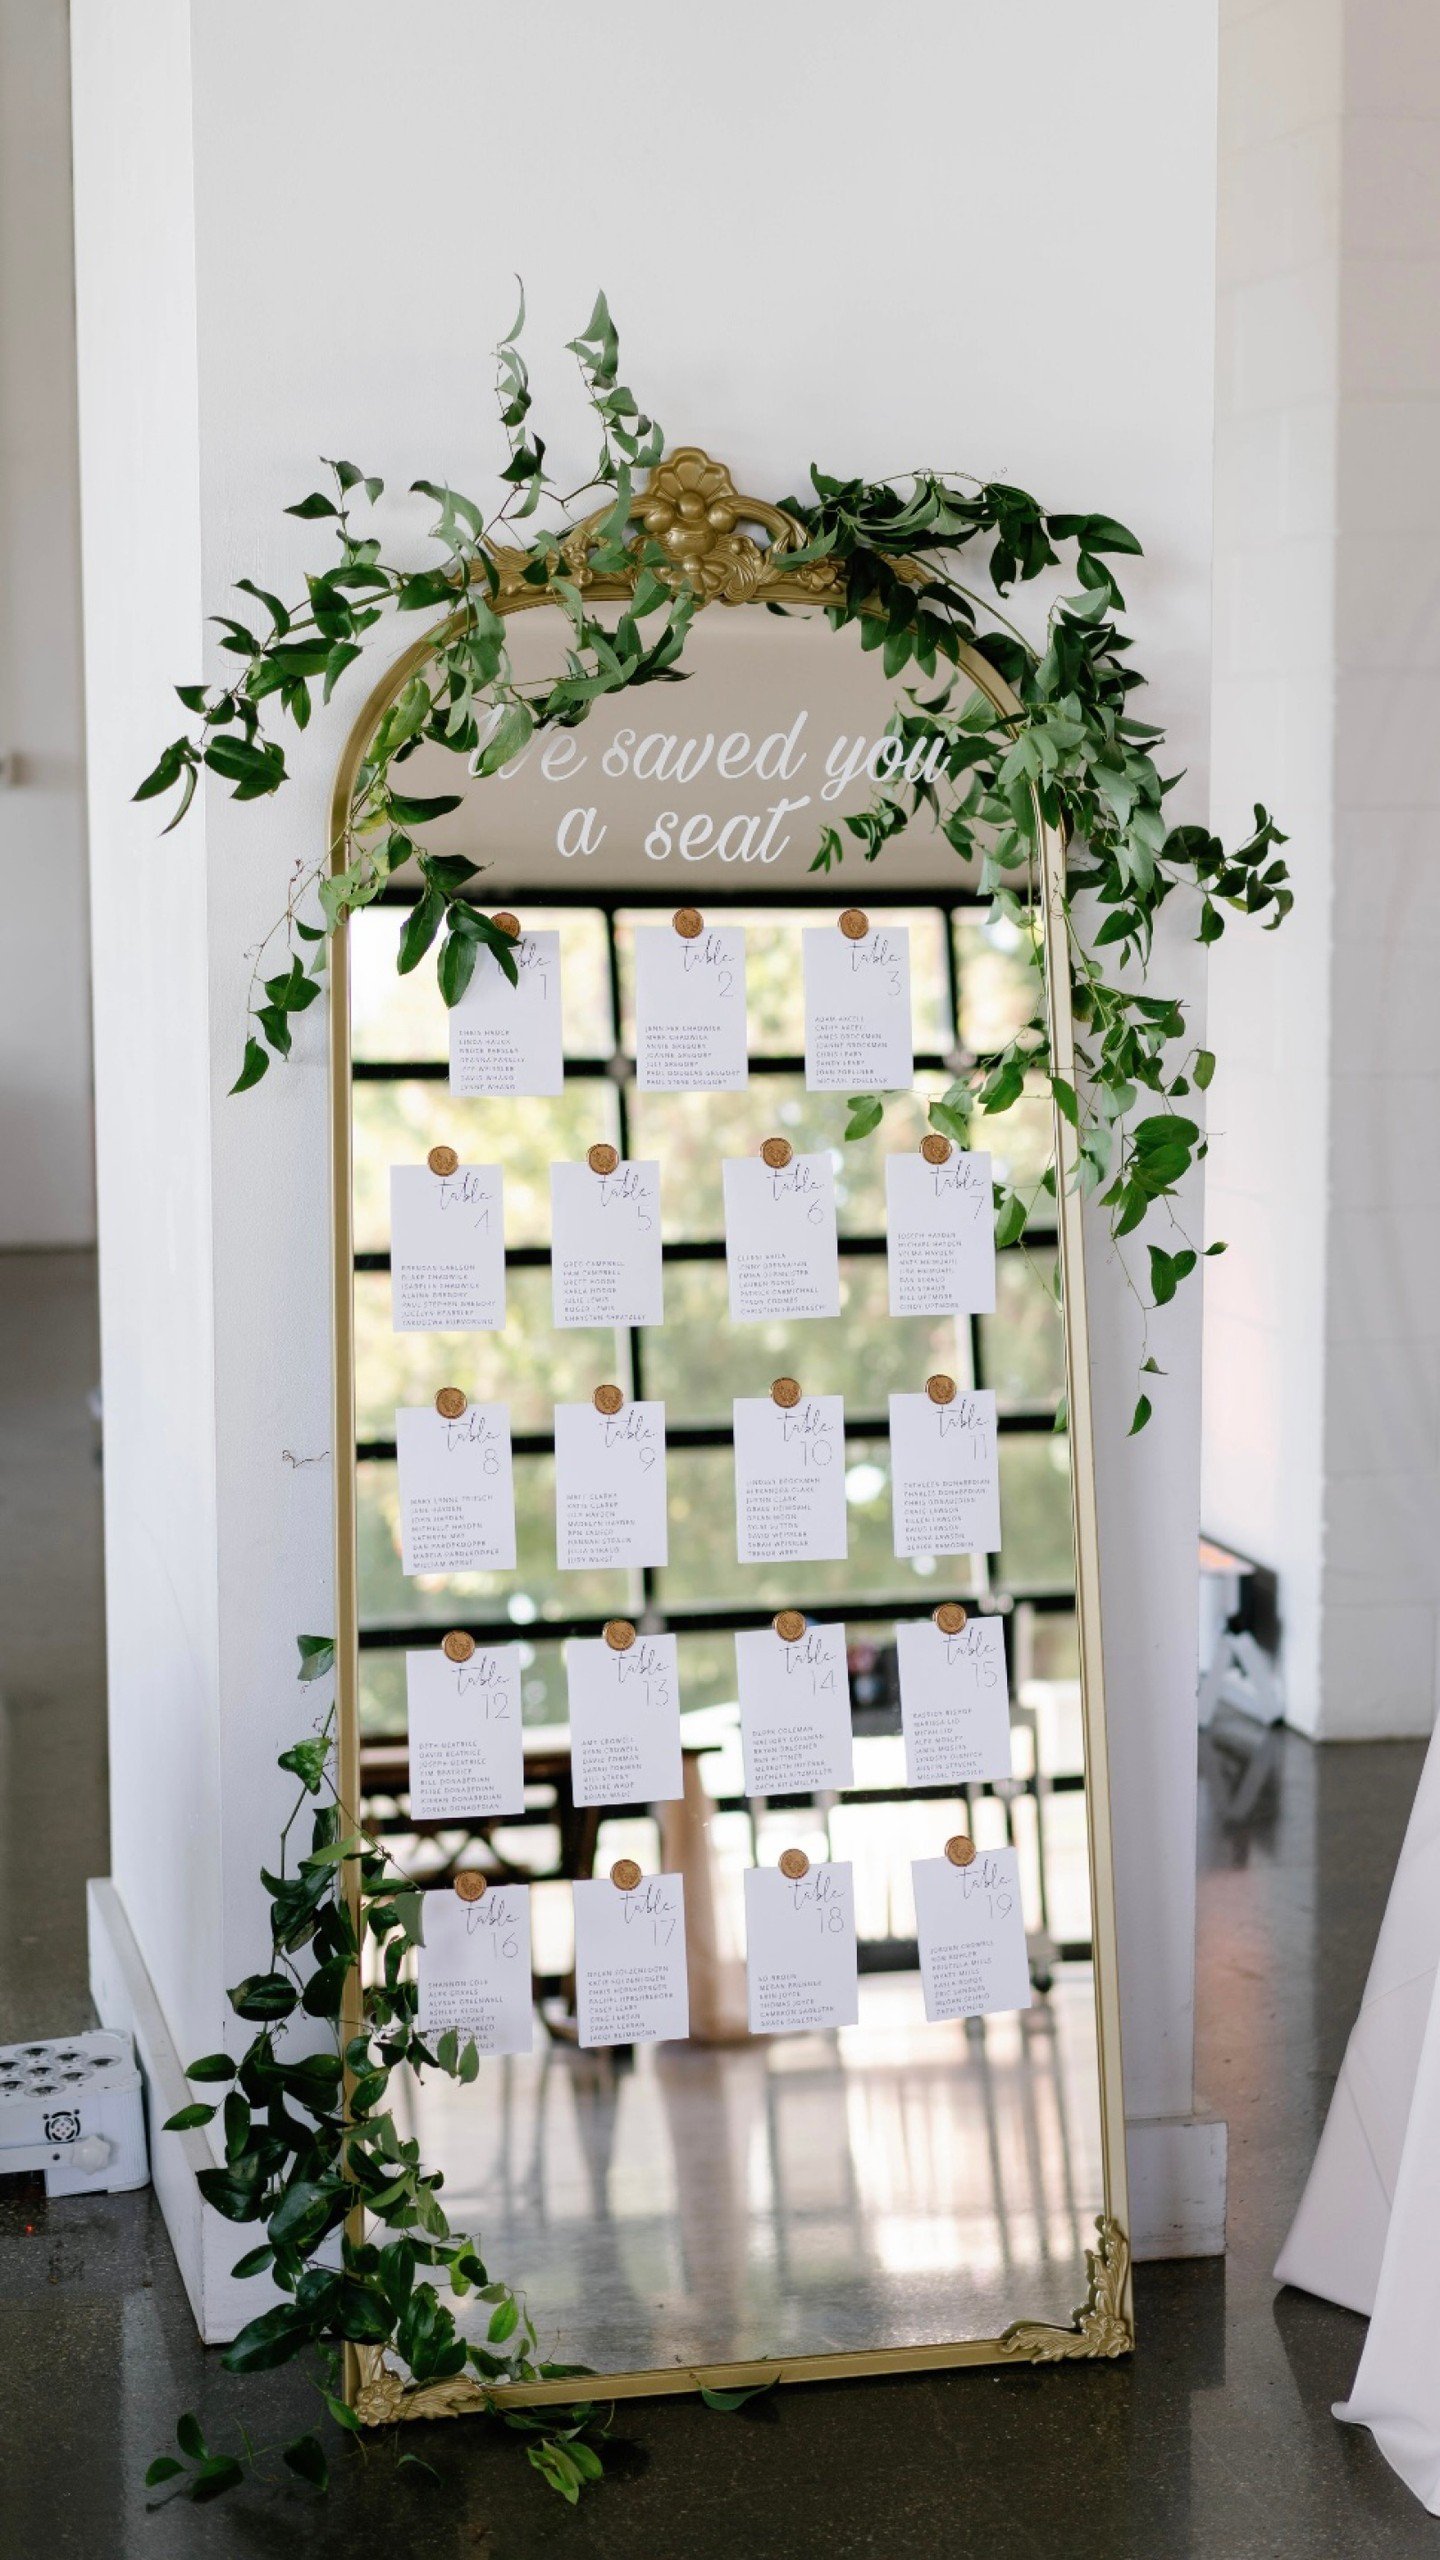 Our mirror seating chart looking stunning as always🪞🌿✨